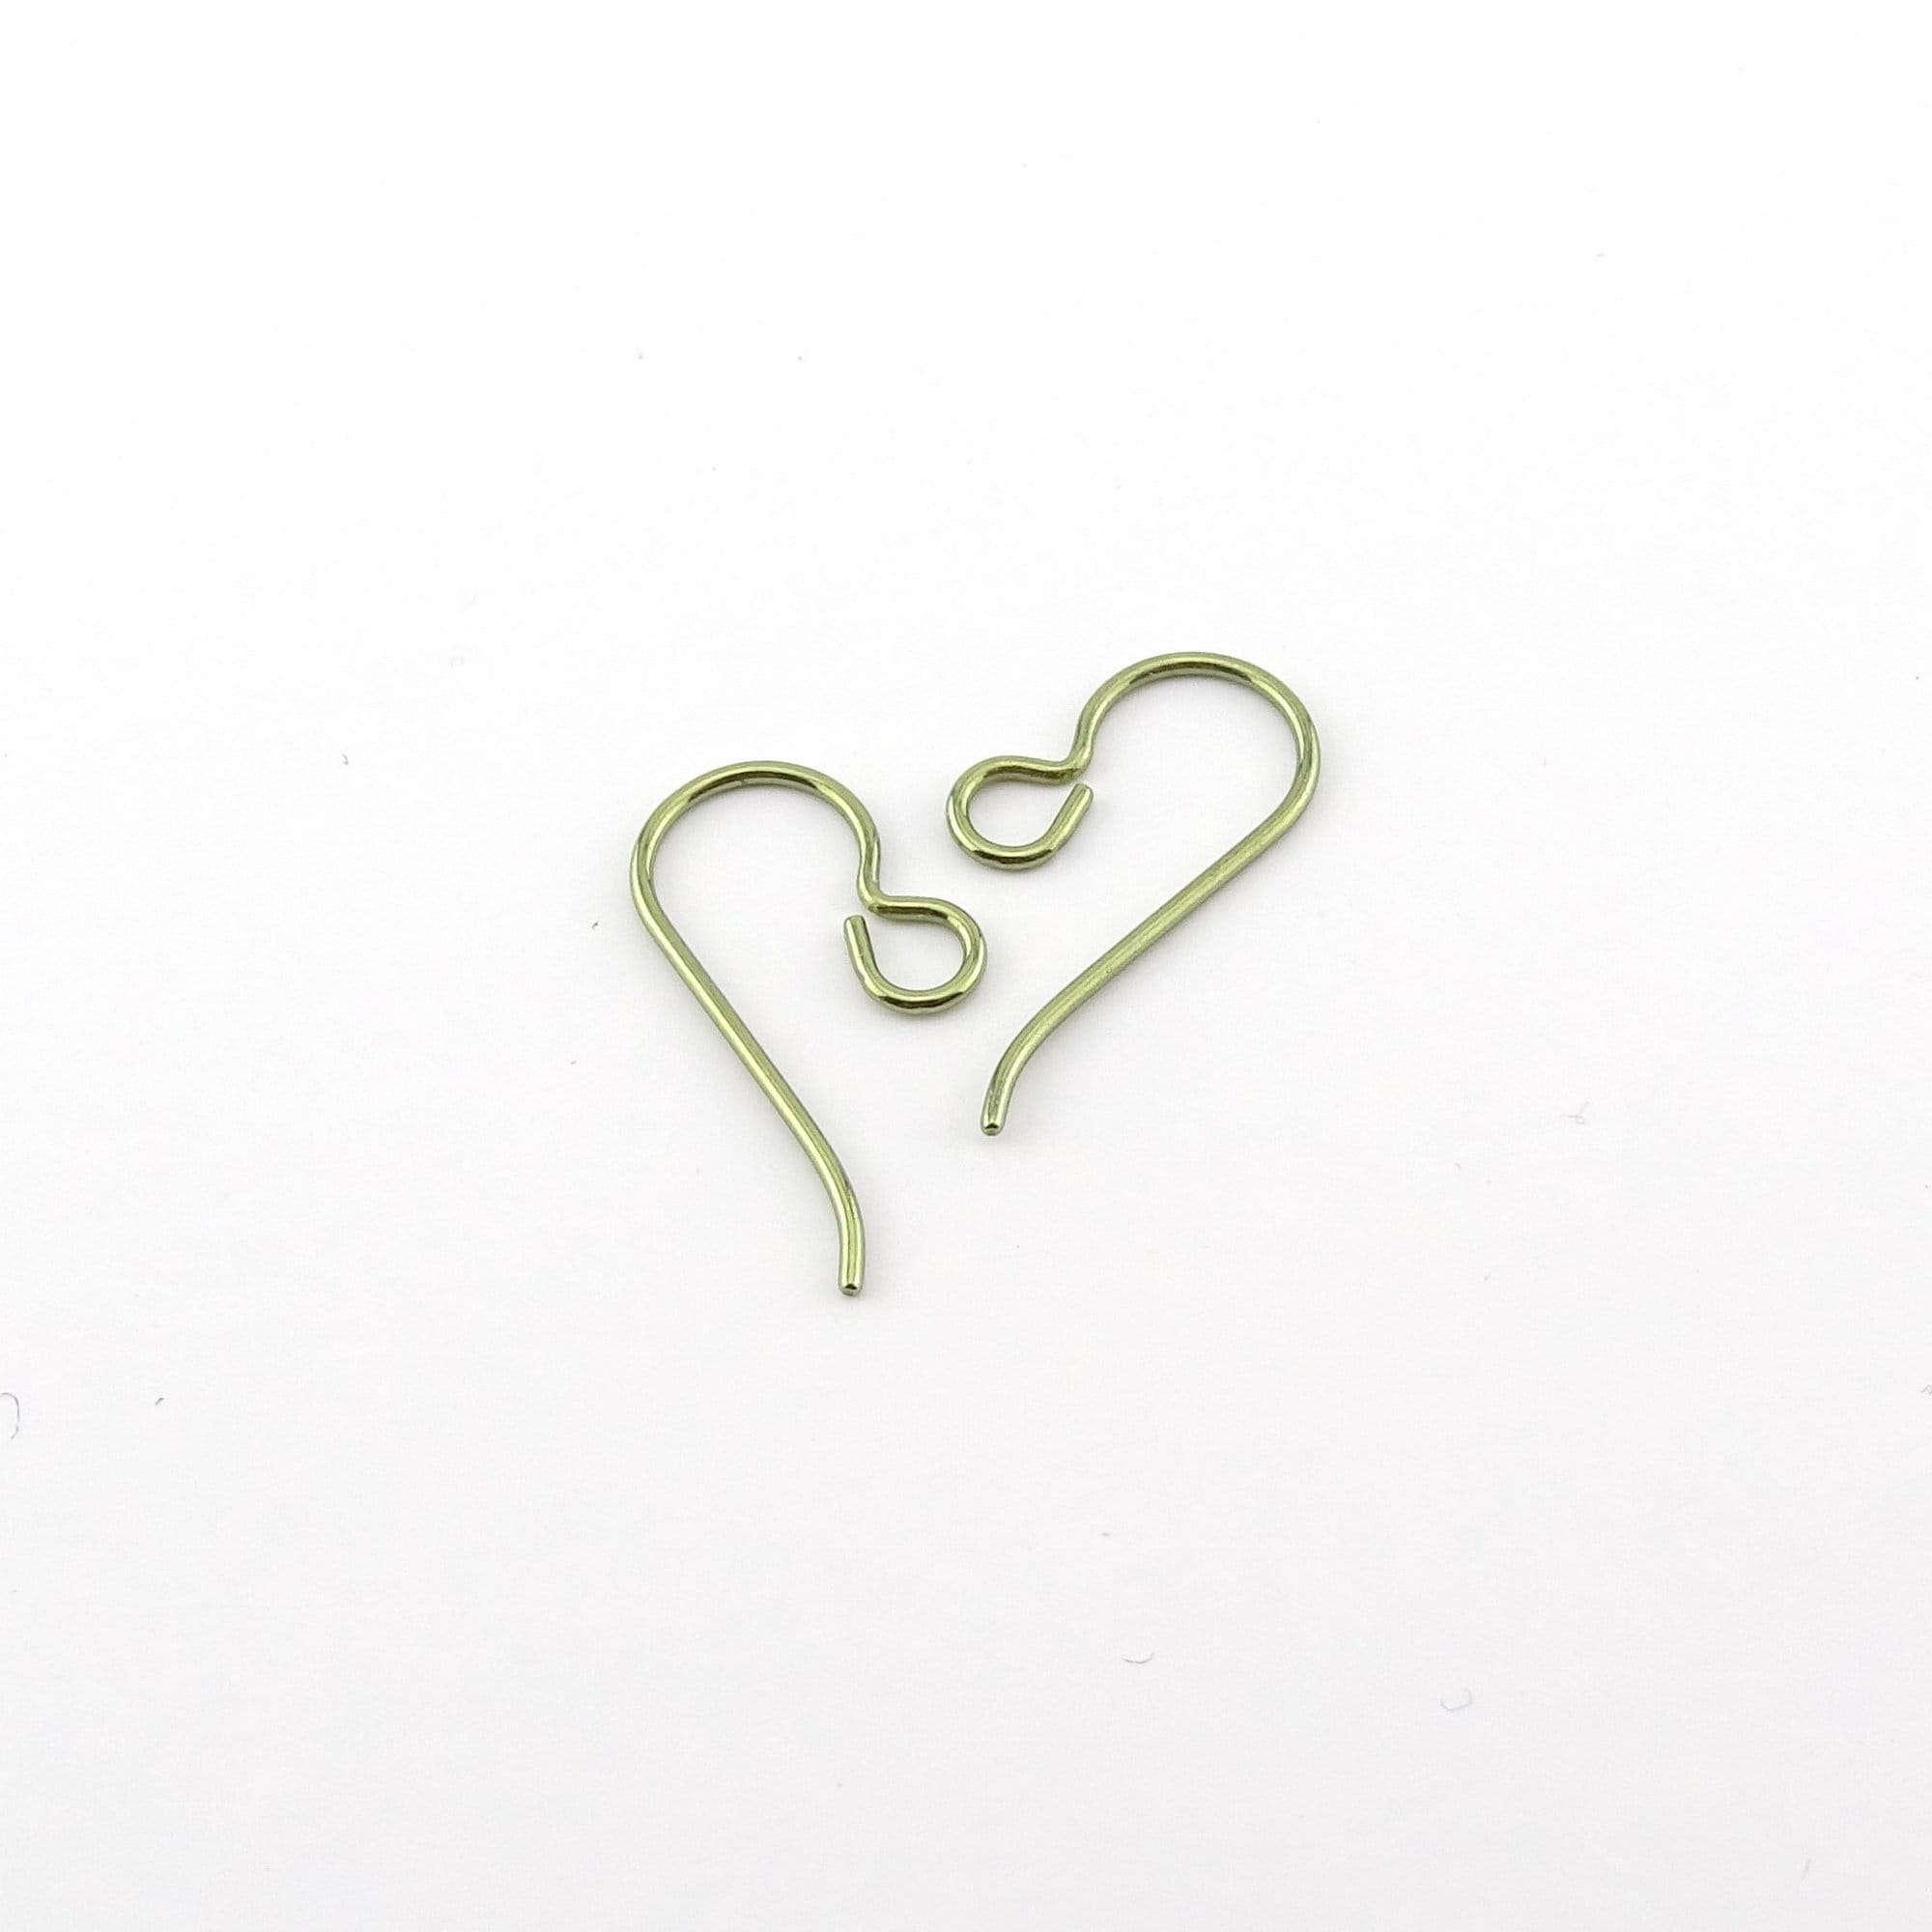 UnCommon Artistry Hypo-Allergenic Surgical Steel Earring Hooks (100)  Jewelry Making Findings (100) (Surgical Steel) - Hypo-Allergenic Surgical  Steel Earring Hooks (100) Jewelry Making Findings (100) (Surgical Steel) .  shop for UnCommon Artistry